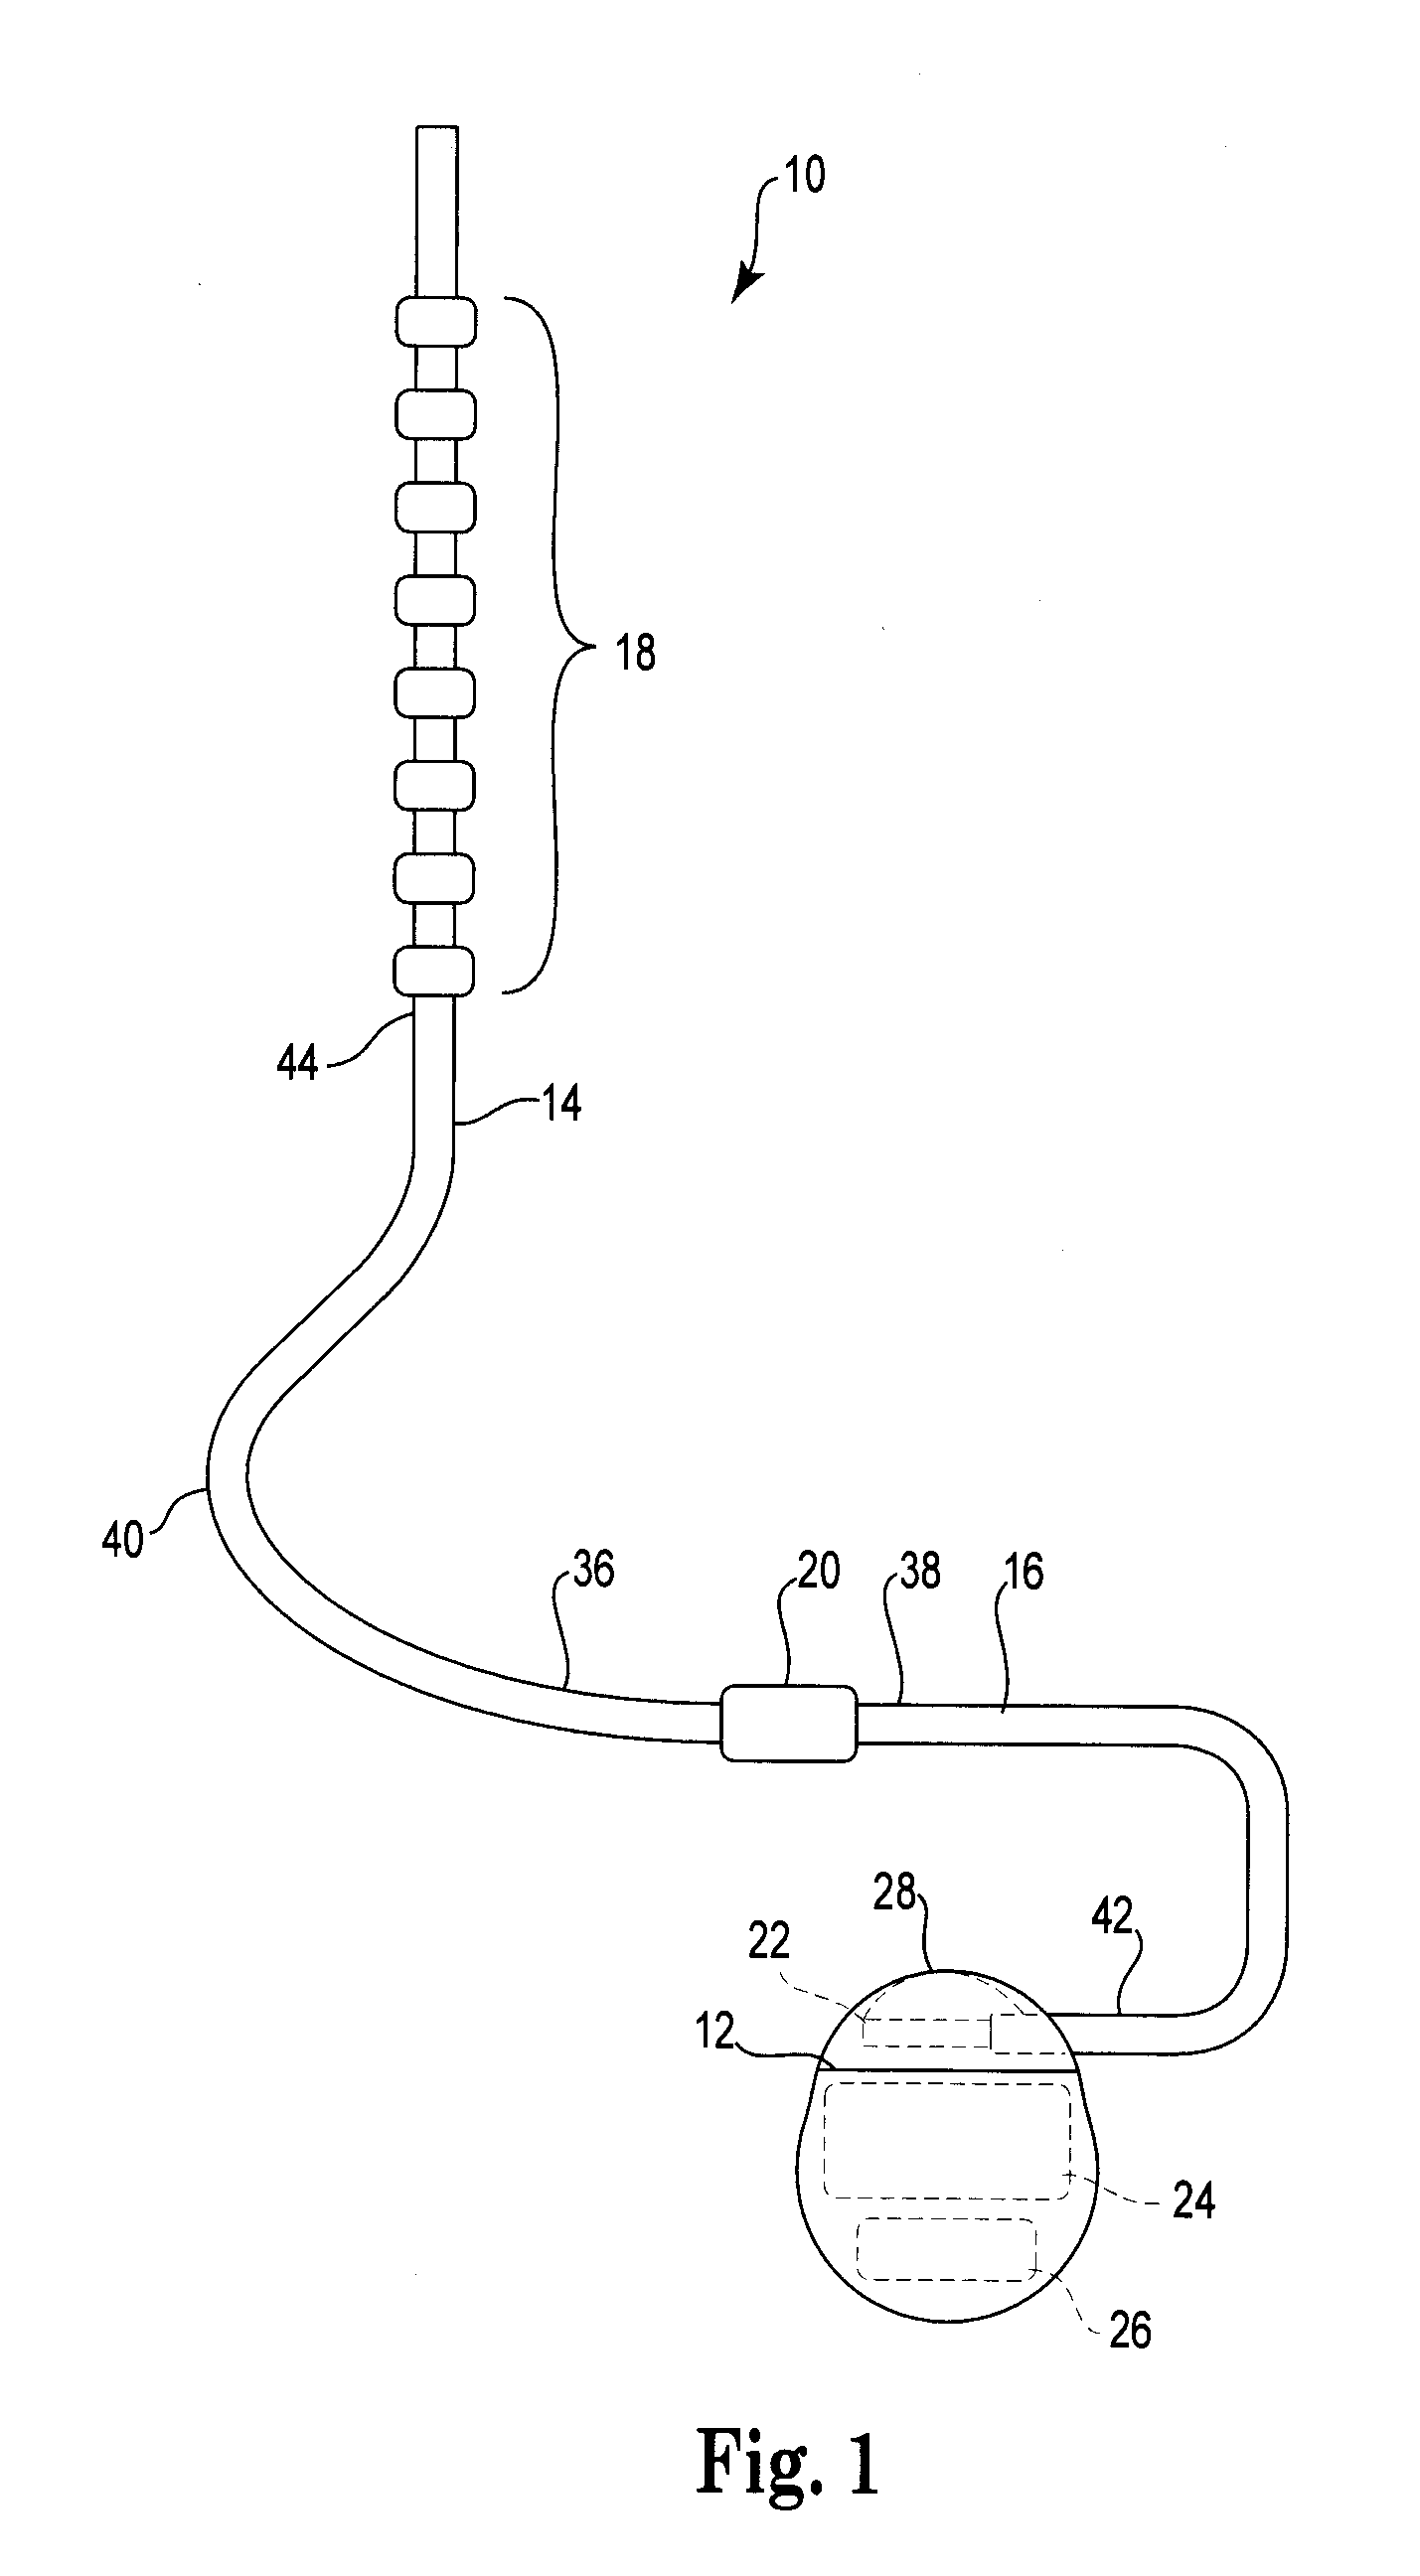 Low insertion force electrical connector for implantable medical devices